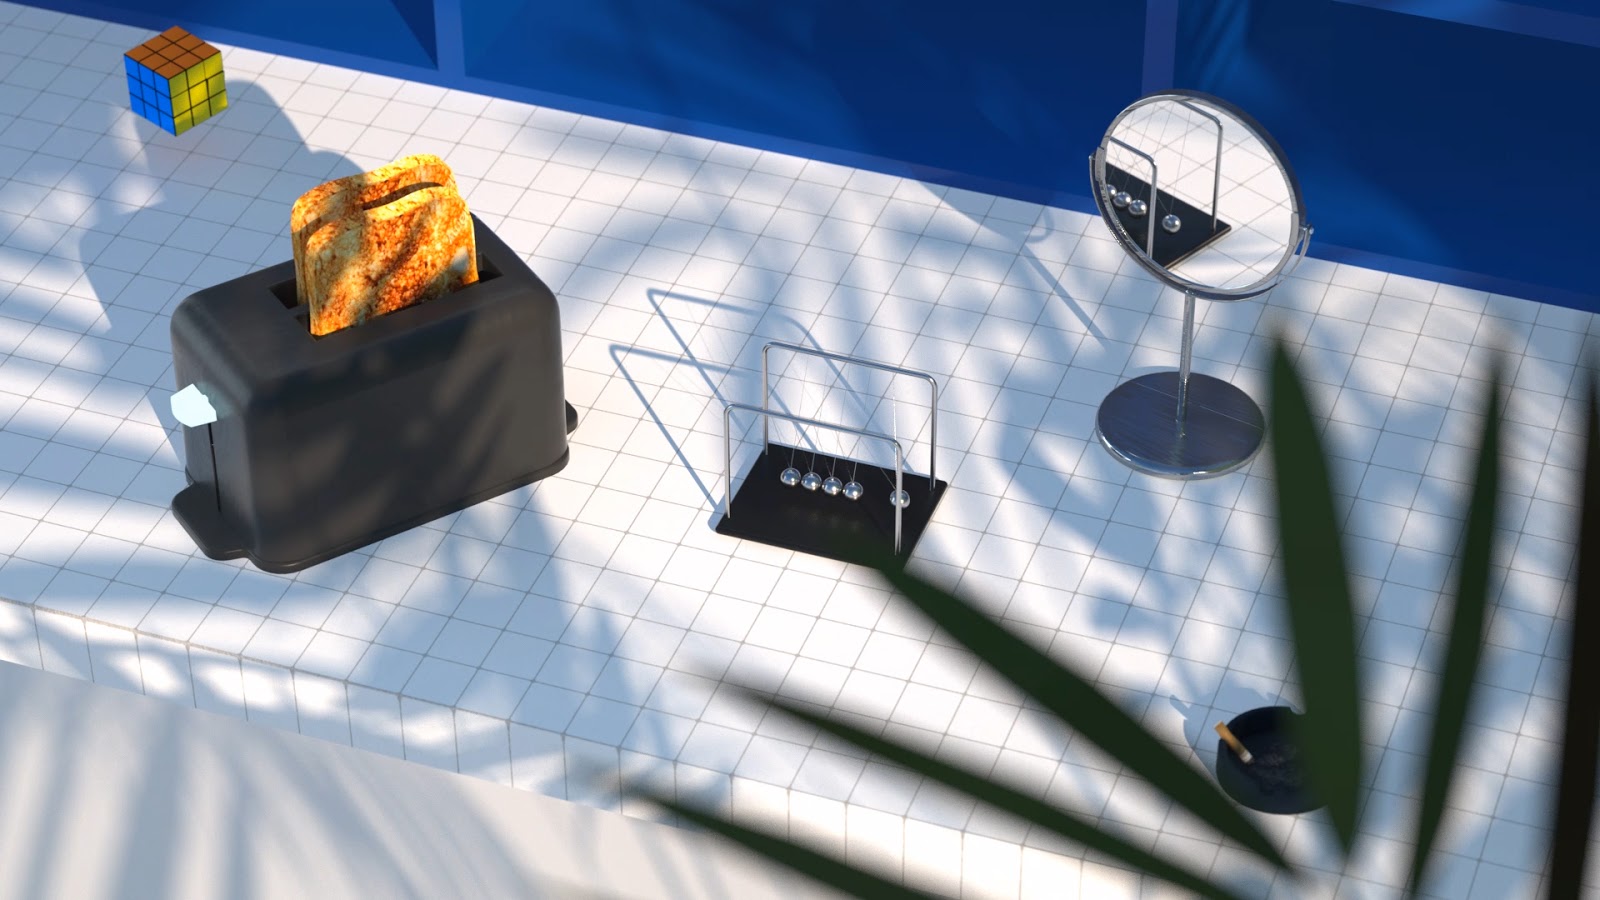 Realistic digital illustration of a table with a toaster, Newton's Cradle desk pendulum, a mirror and Rubik's cube on it